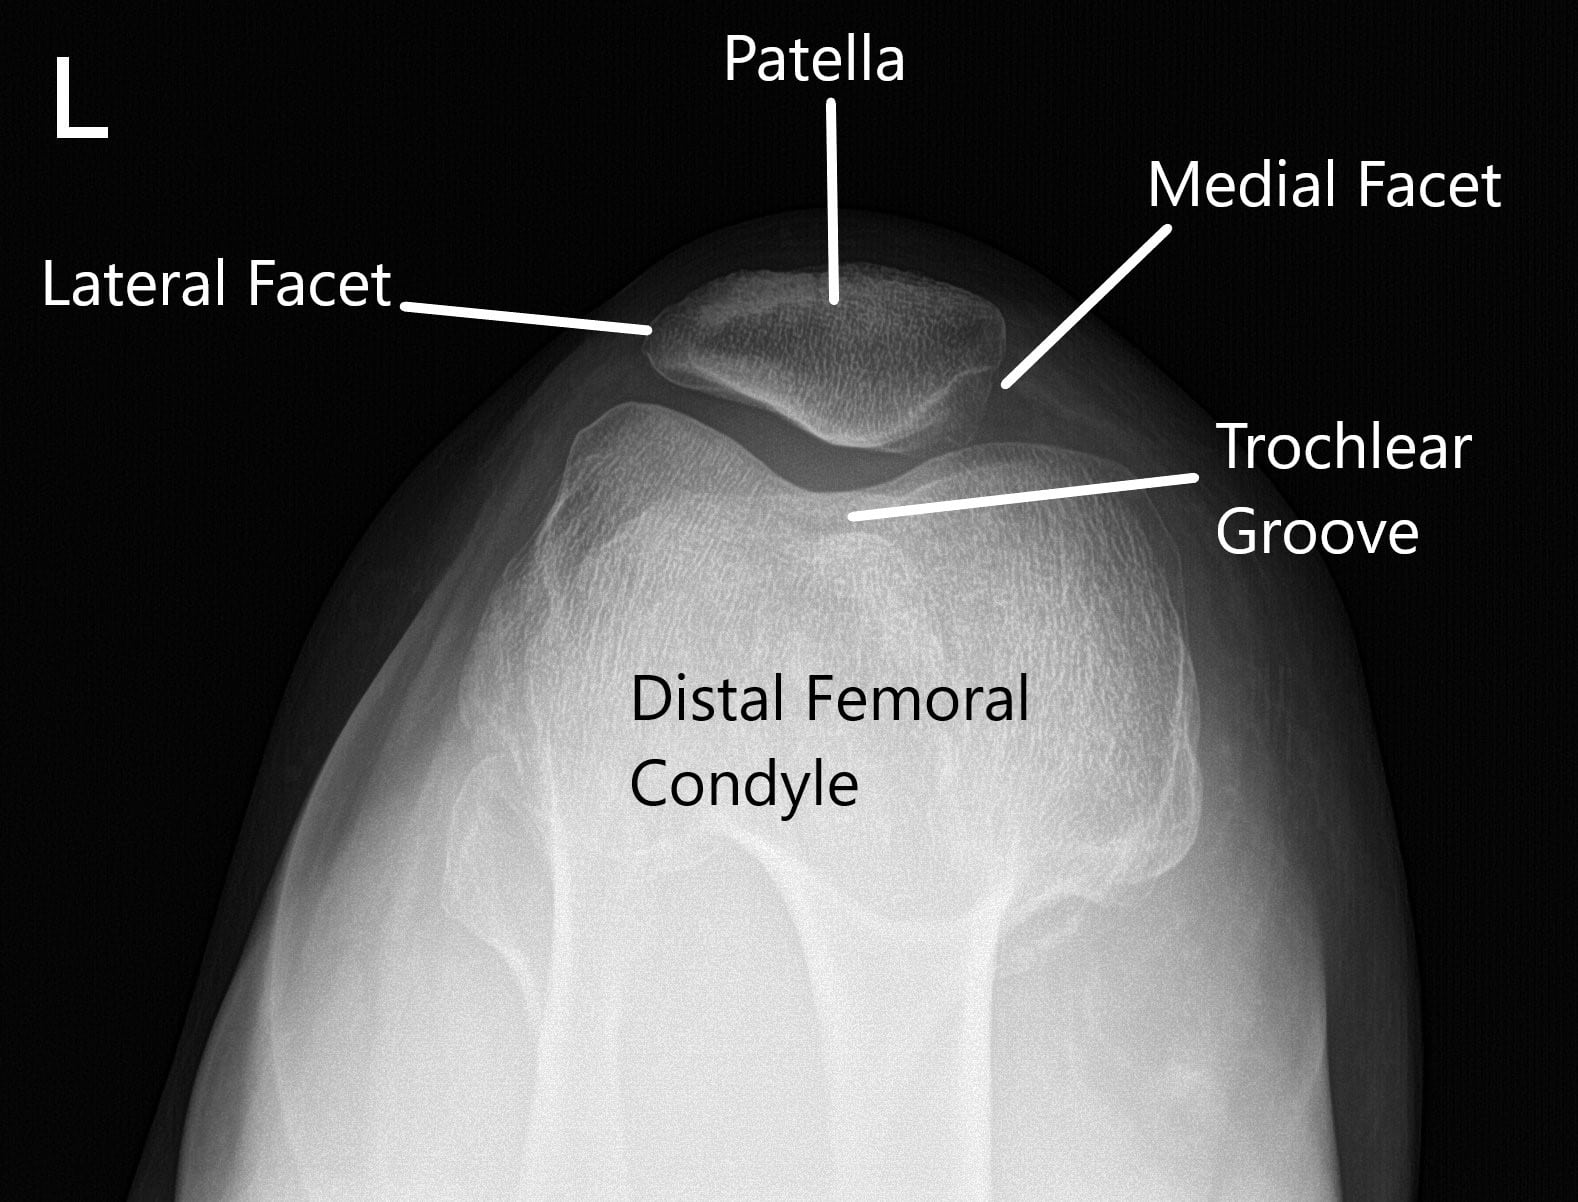 X-ray of the left knee in AP and skyline view of the patella 2